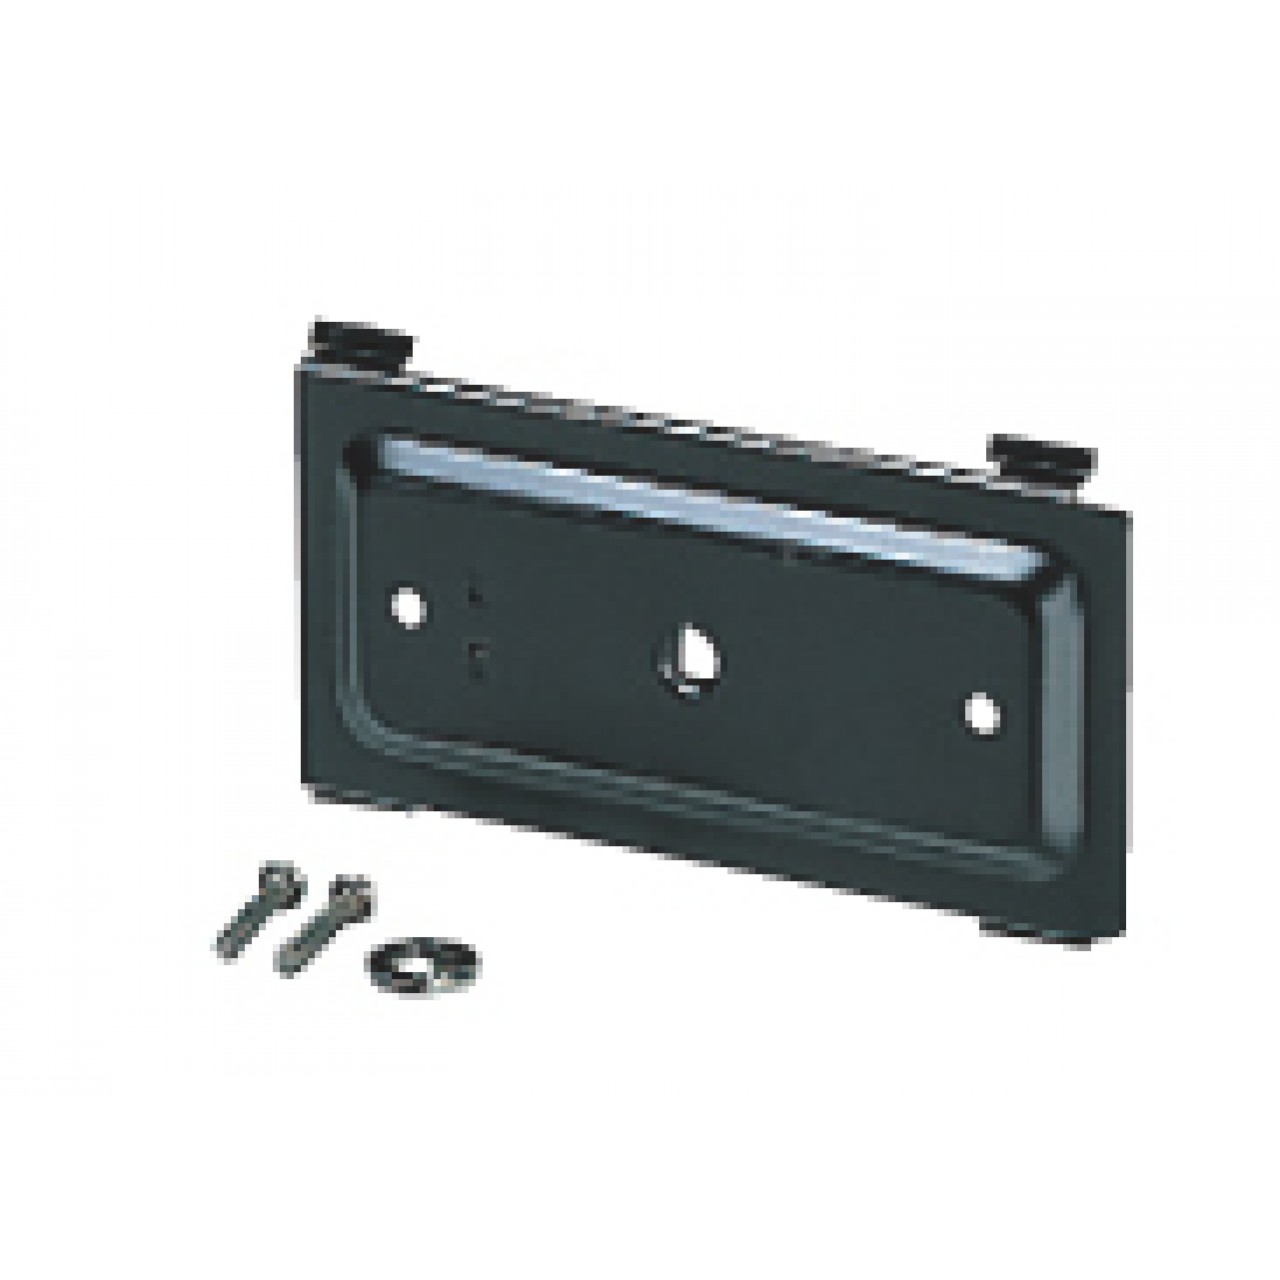 MB-63 Covers, fasteners and cradles - ICOM